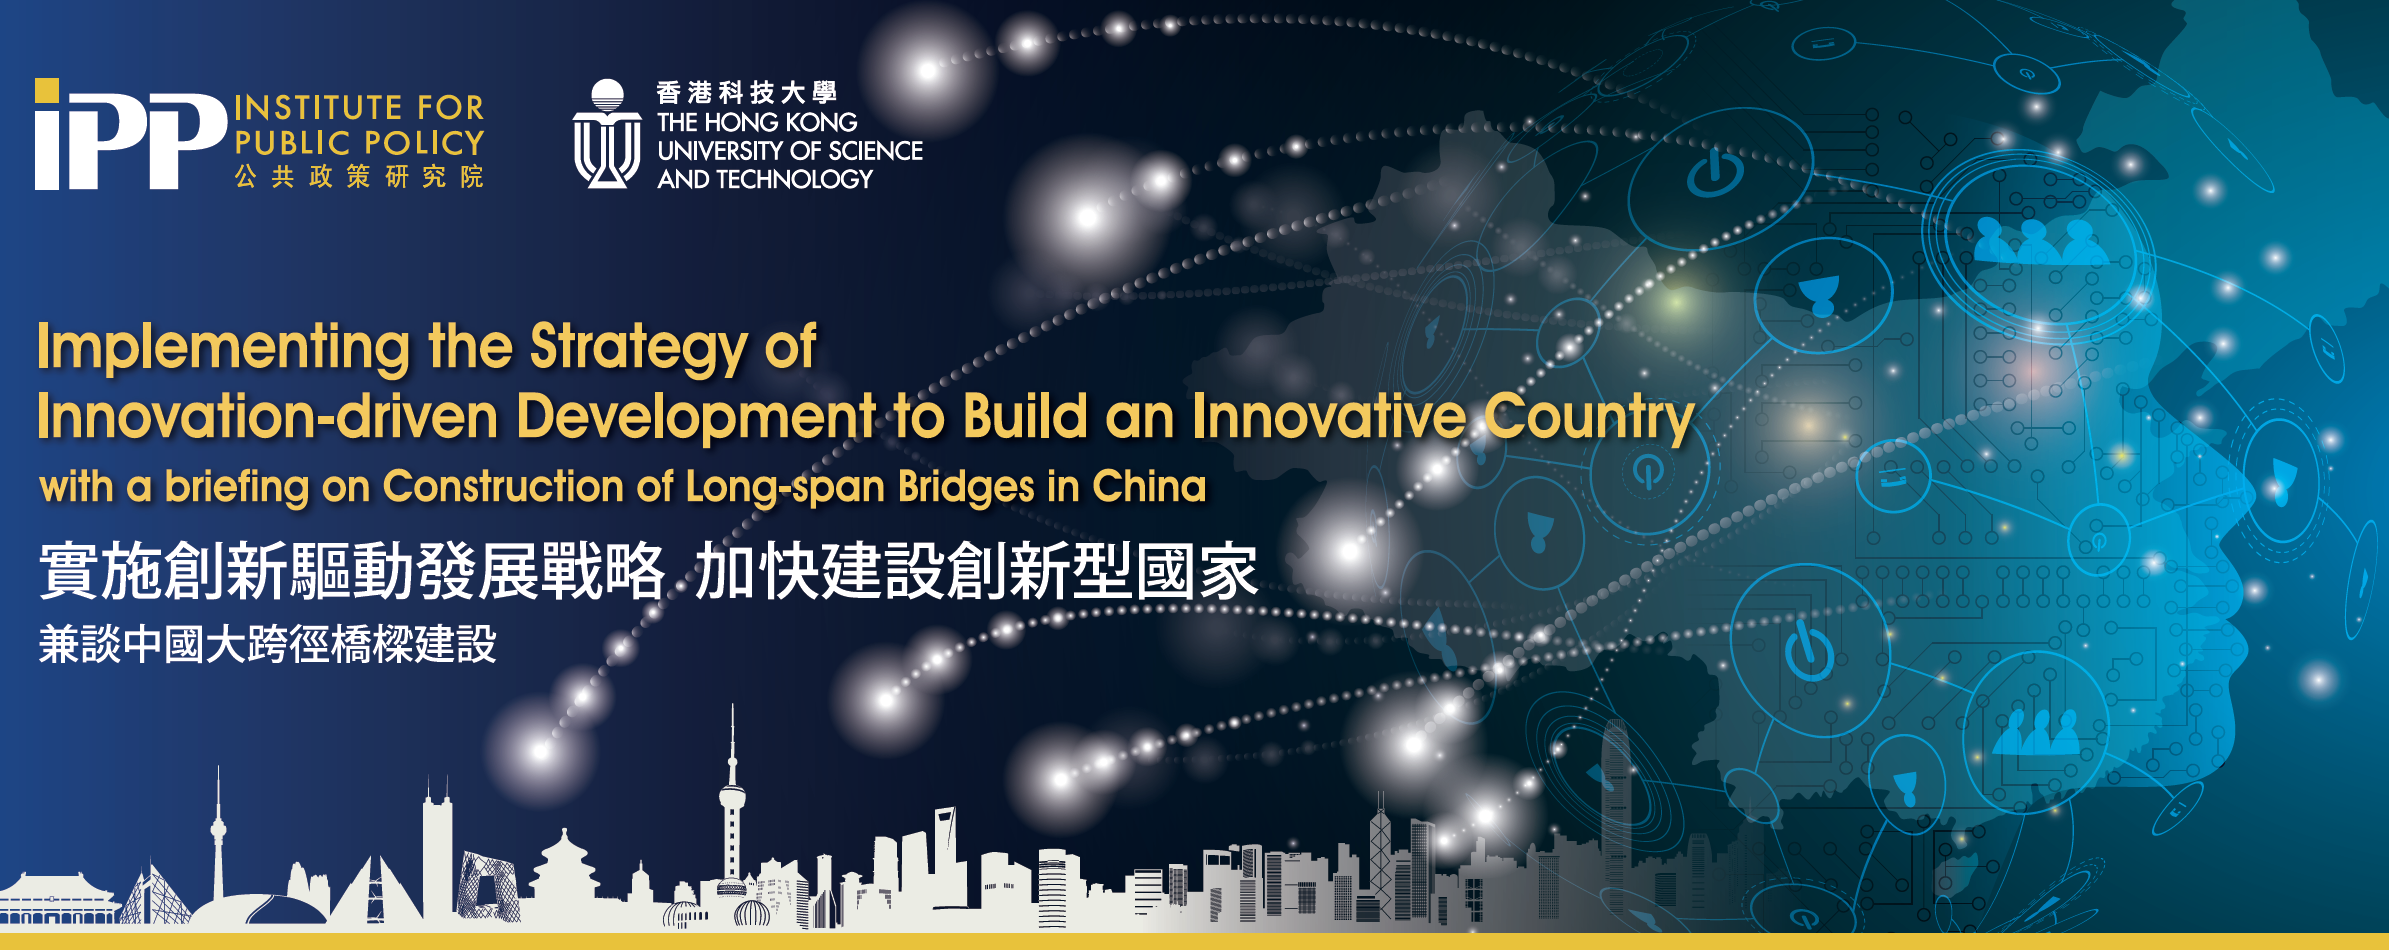 Implementing the Strategy of Innovation-driven Development to Build an Innovative Country 實施創新驅動發展戰略 加快建設創新型國家